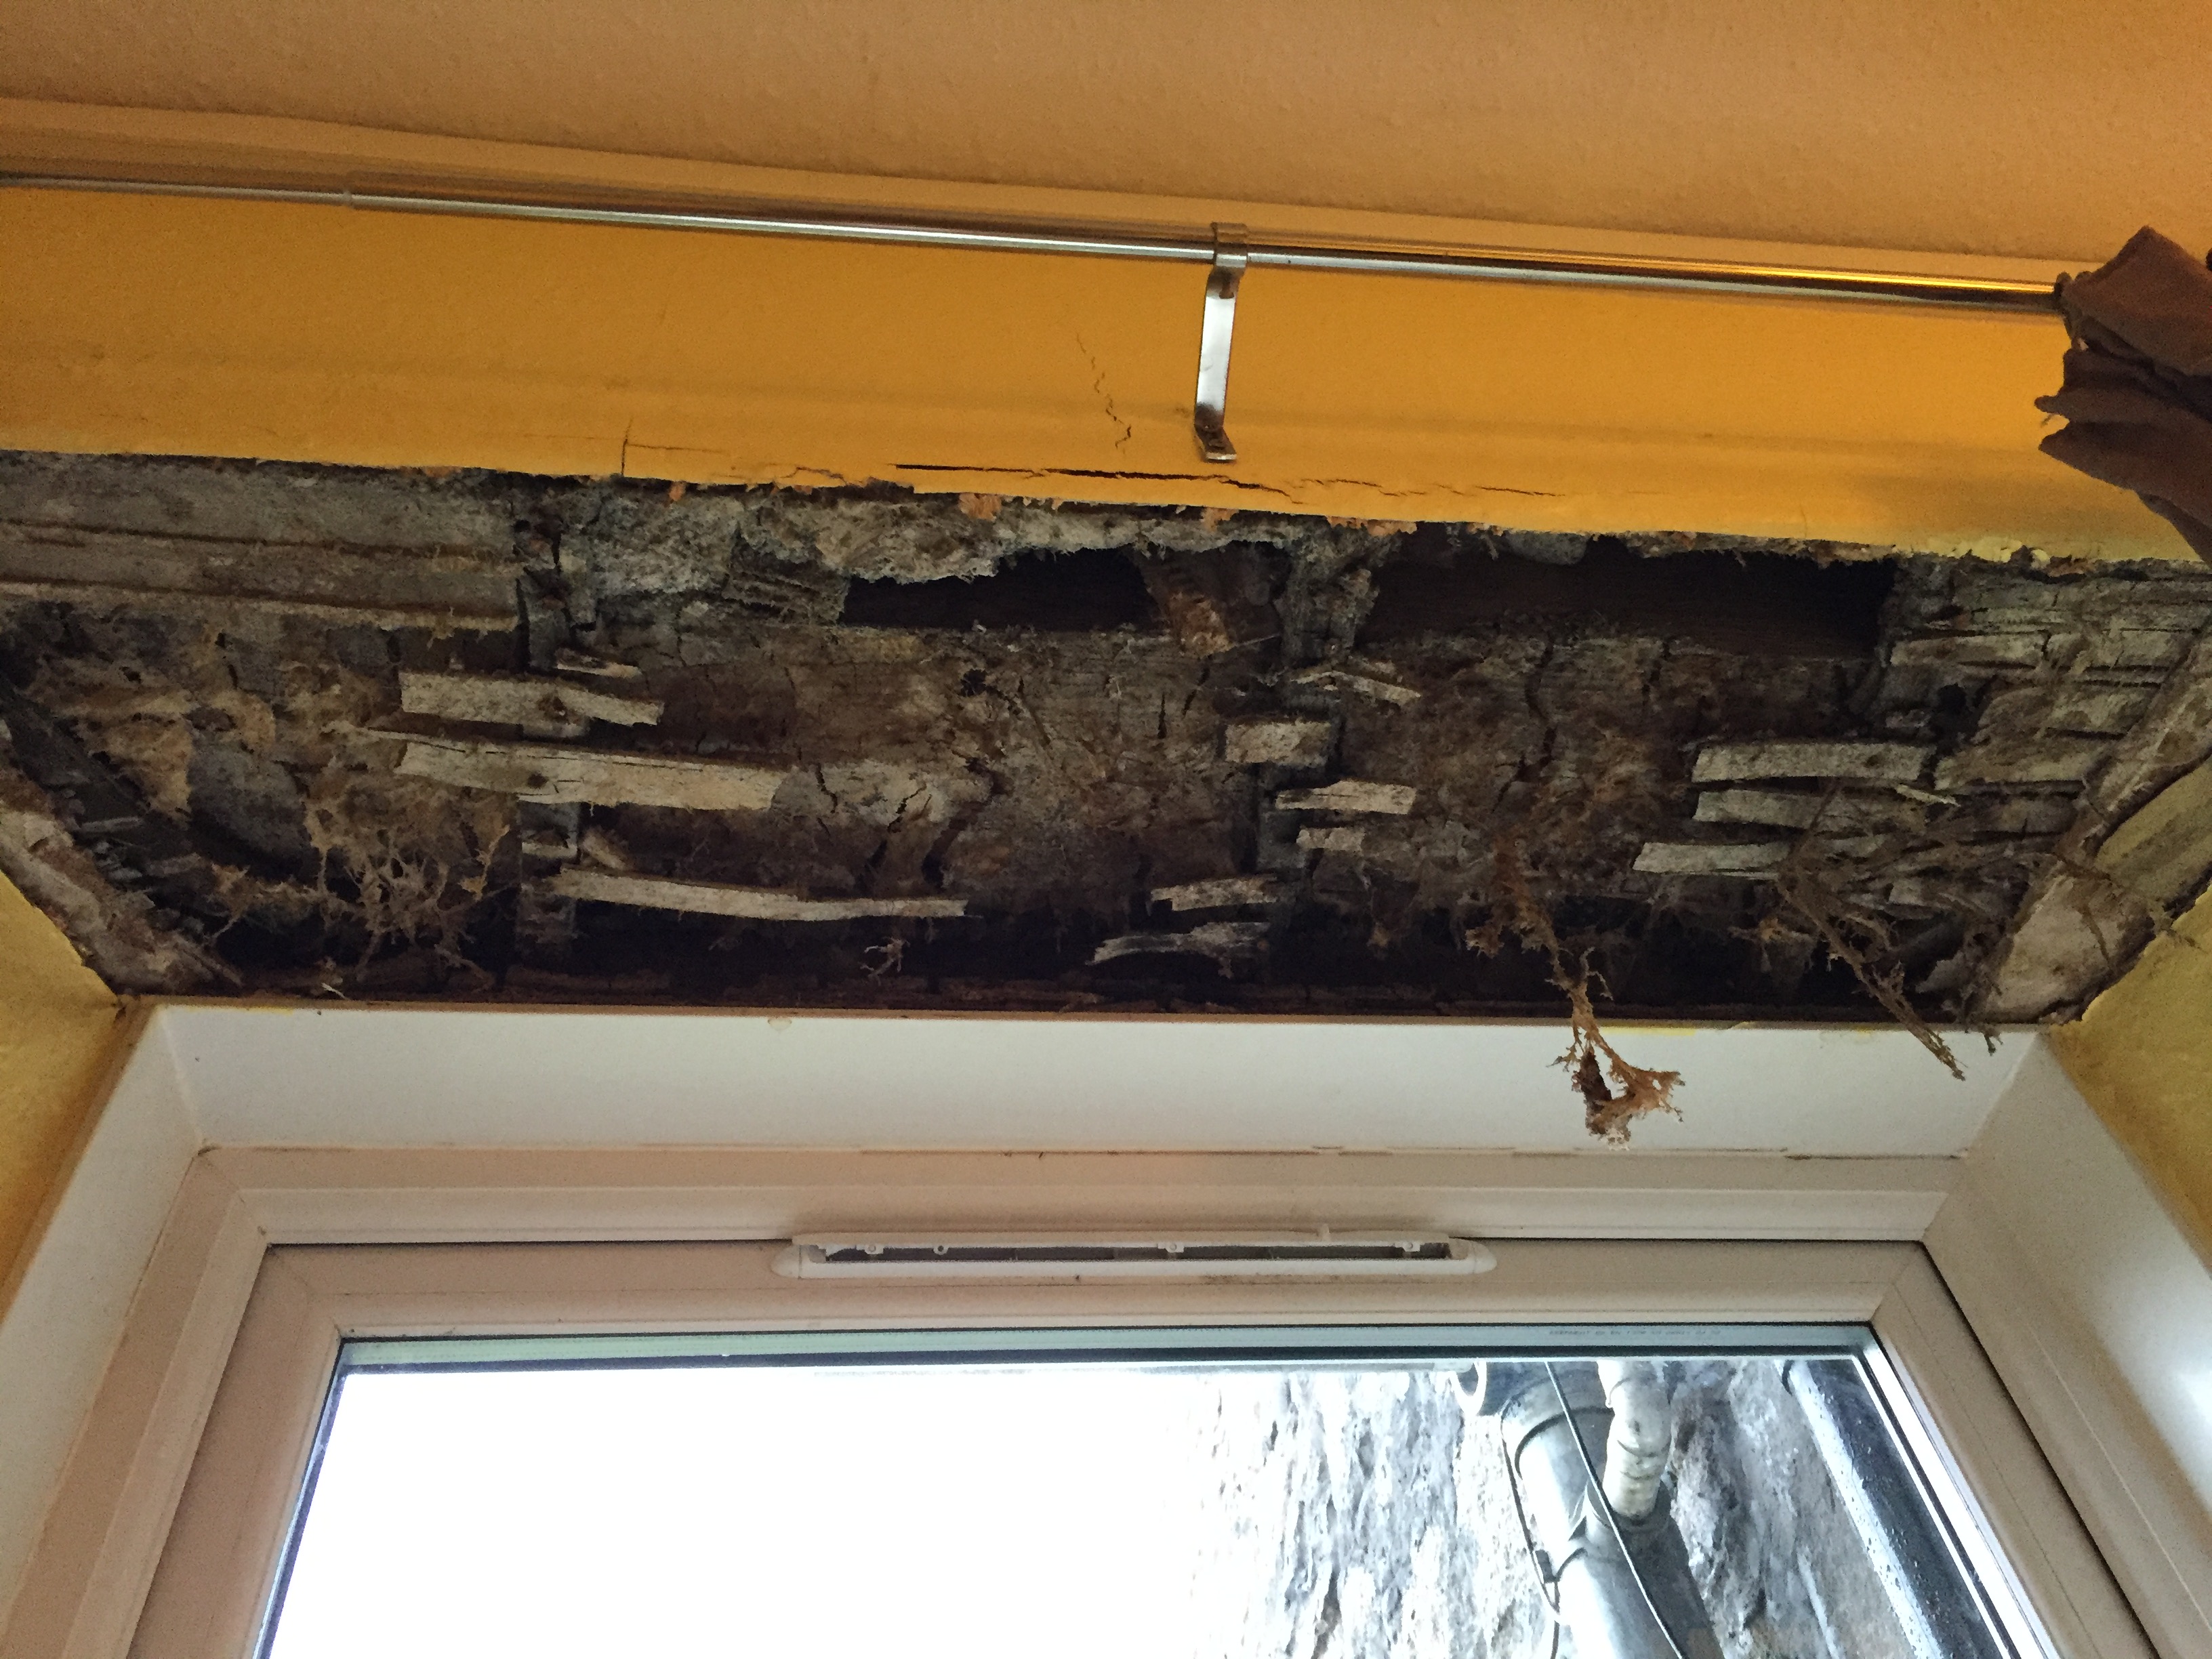 dry rot affected timber lintel